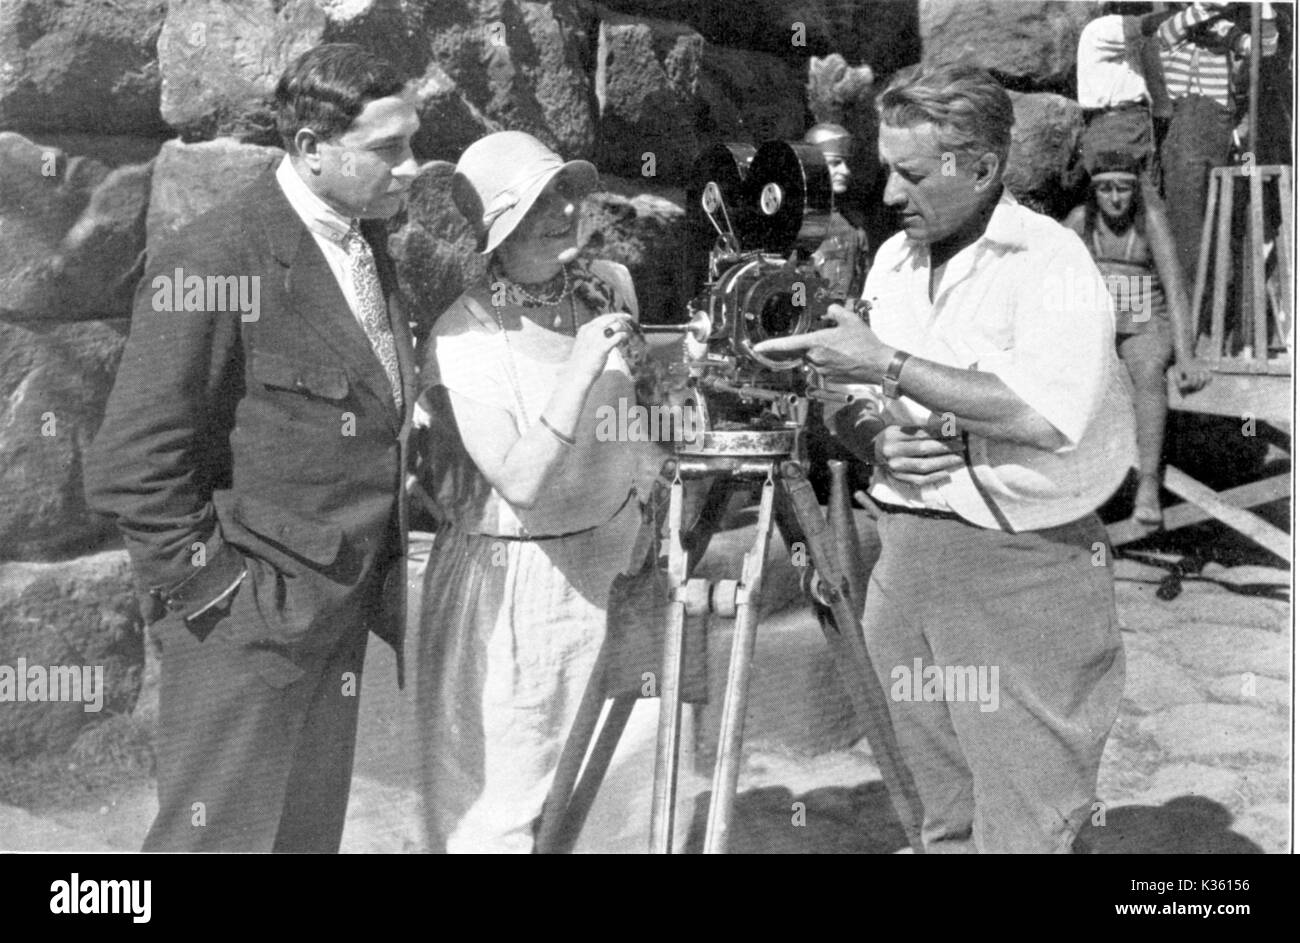 BEN HUR  DURING LOCATION FILMING IN ROME DIRECTOR FRED NIBLO (RIGHT) SHOWS A BELL AND HOWELL CAMERA TO LINA CAVALIERI AND HER HUSBAND LUCIEN MURATORE BOTH GRAND OPERA STARS WHO HAVE APPEARED IN A NUMBER OF FILMS.   MPP/364BK BEN HUR L-R, LUCIEN MURATORE, LINA CAVALIERI, FRED NIBLO director Stock Photo